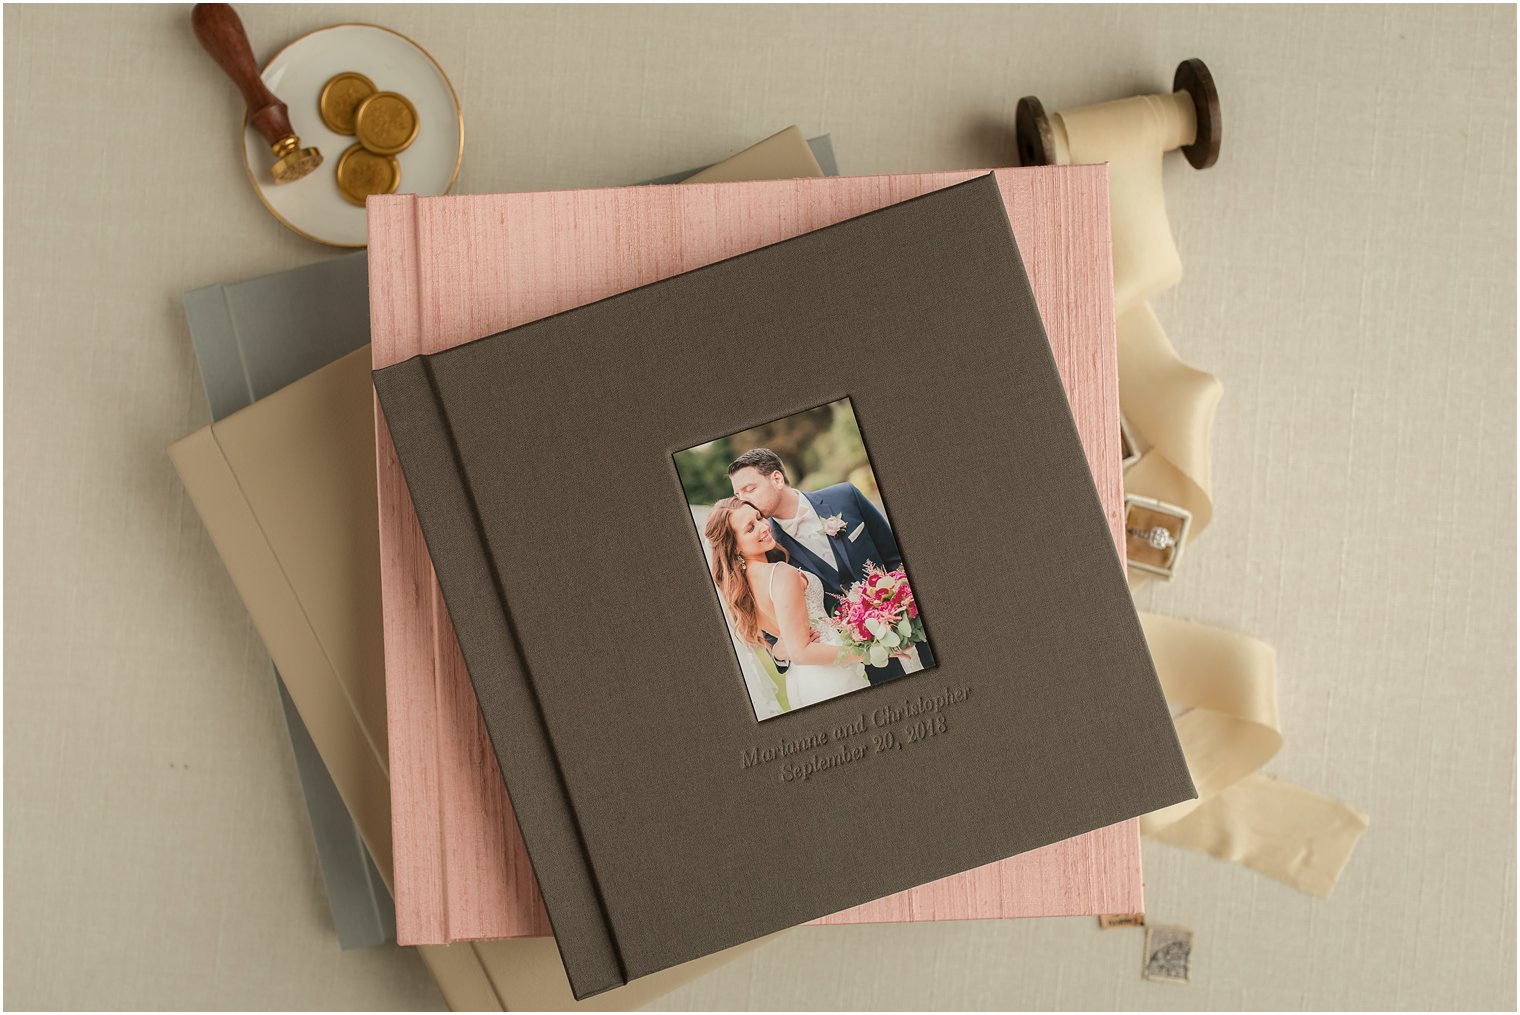 Brown linen album with cover photo